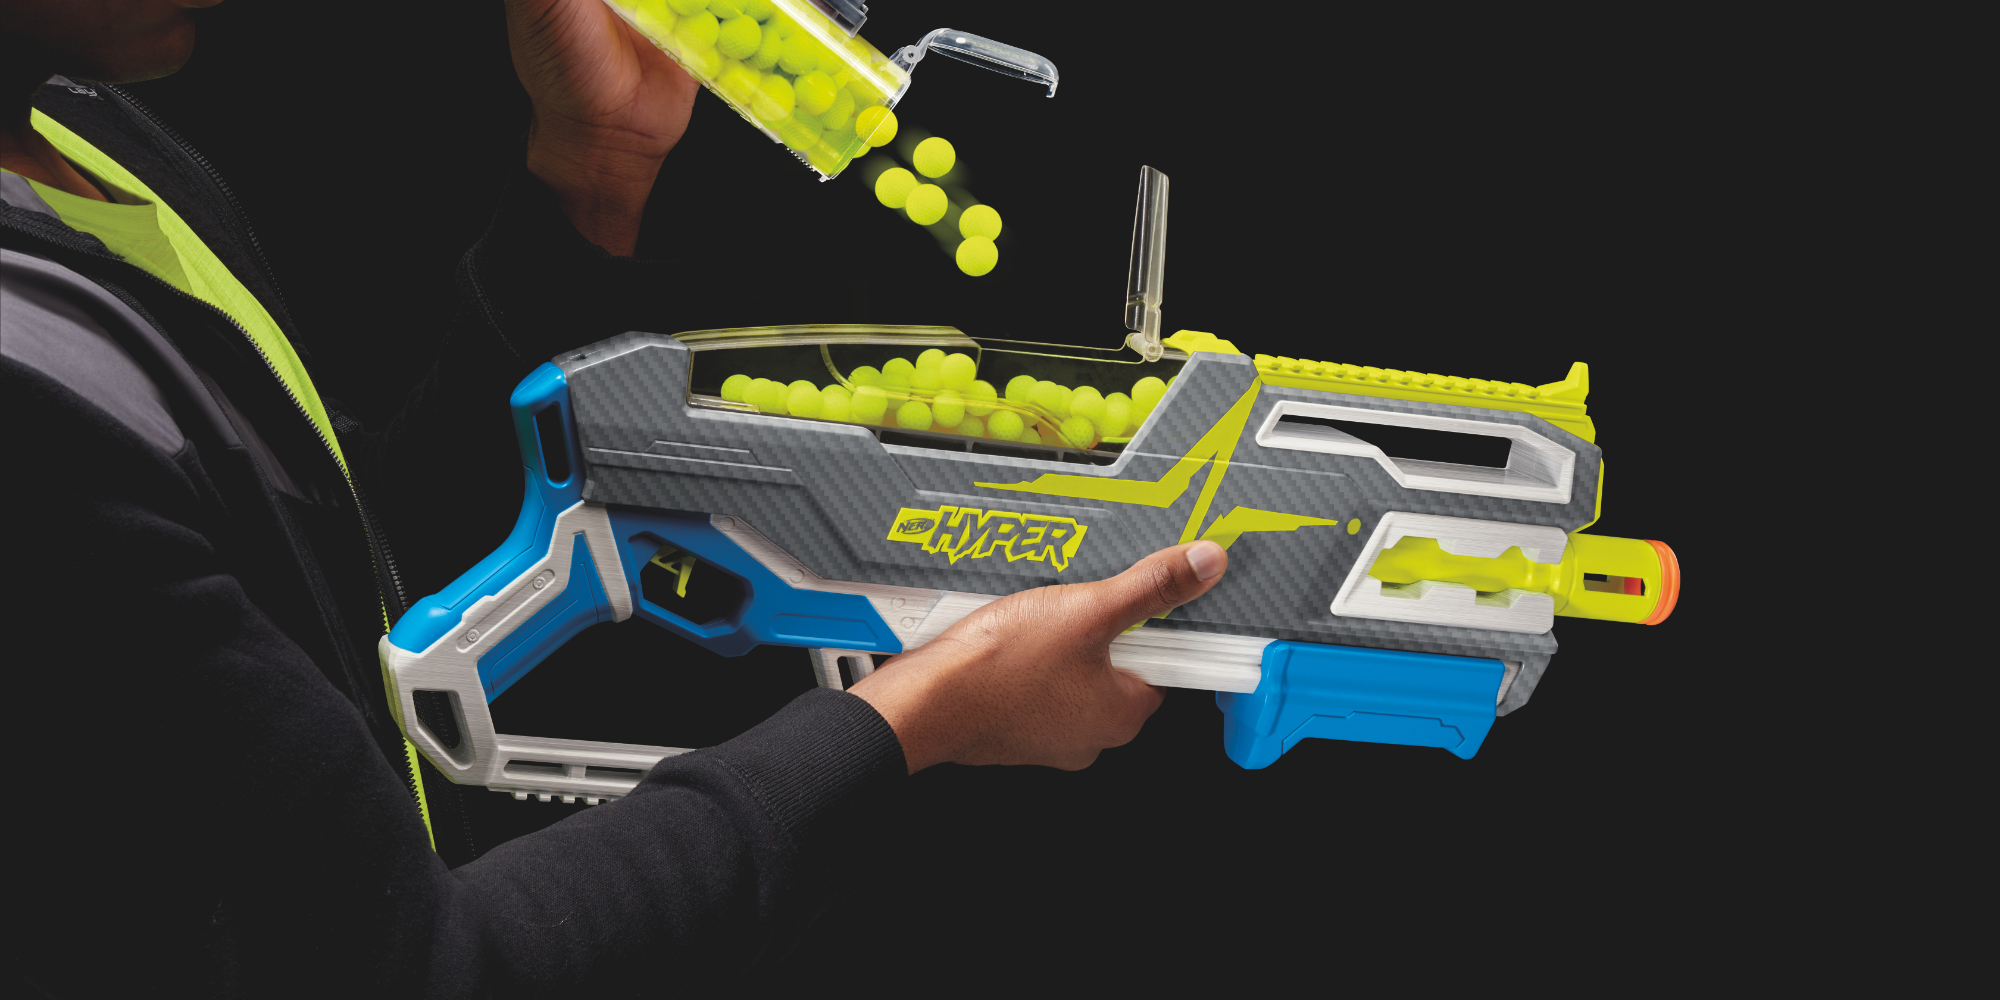 NERF HYPER lineup fires at 110 fps with 3-4x round capacity - 9to5Toys